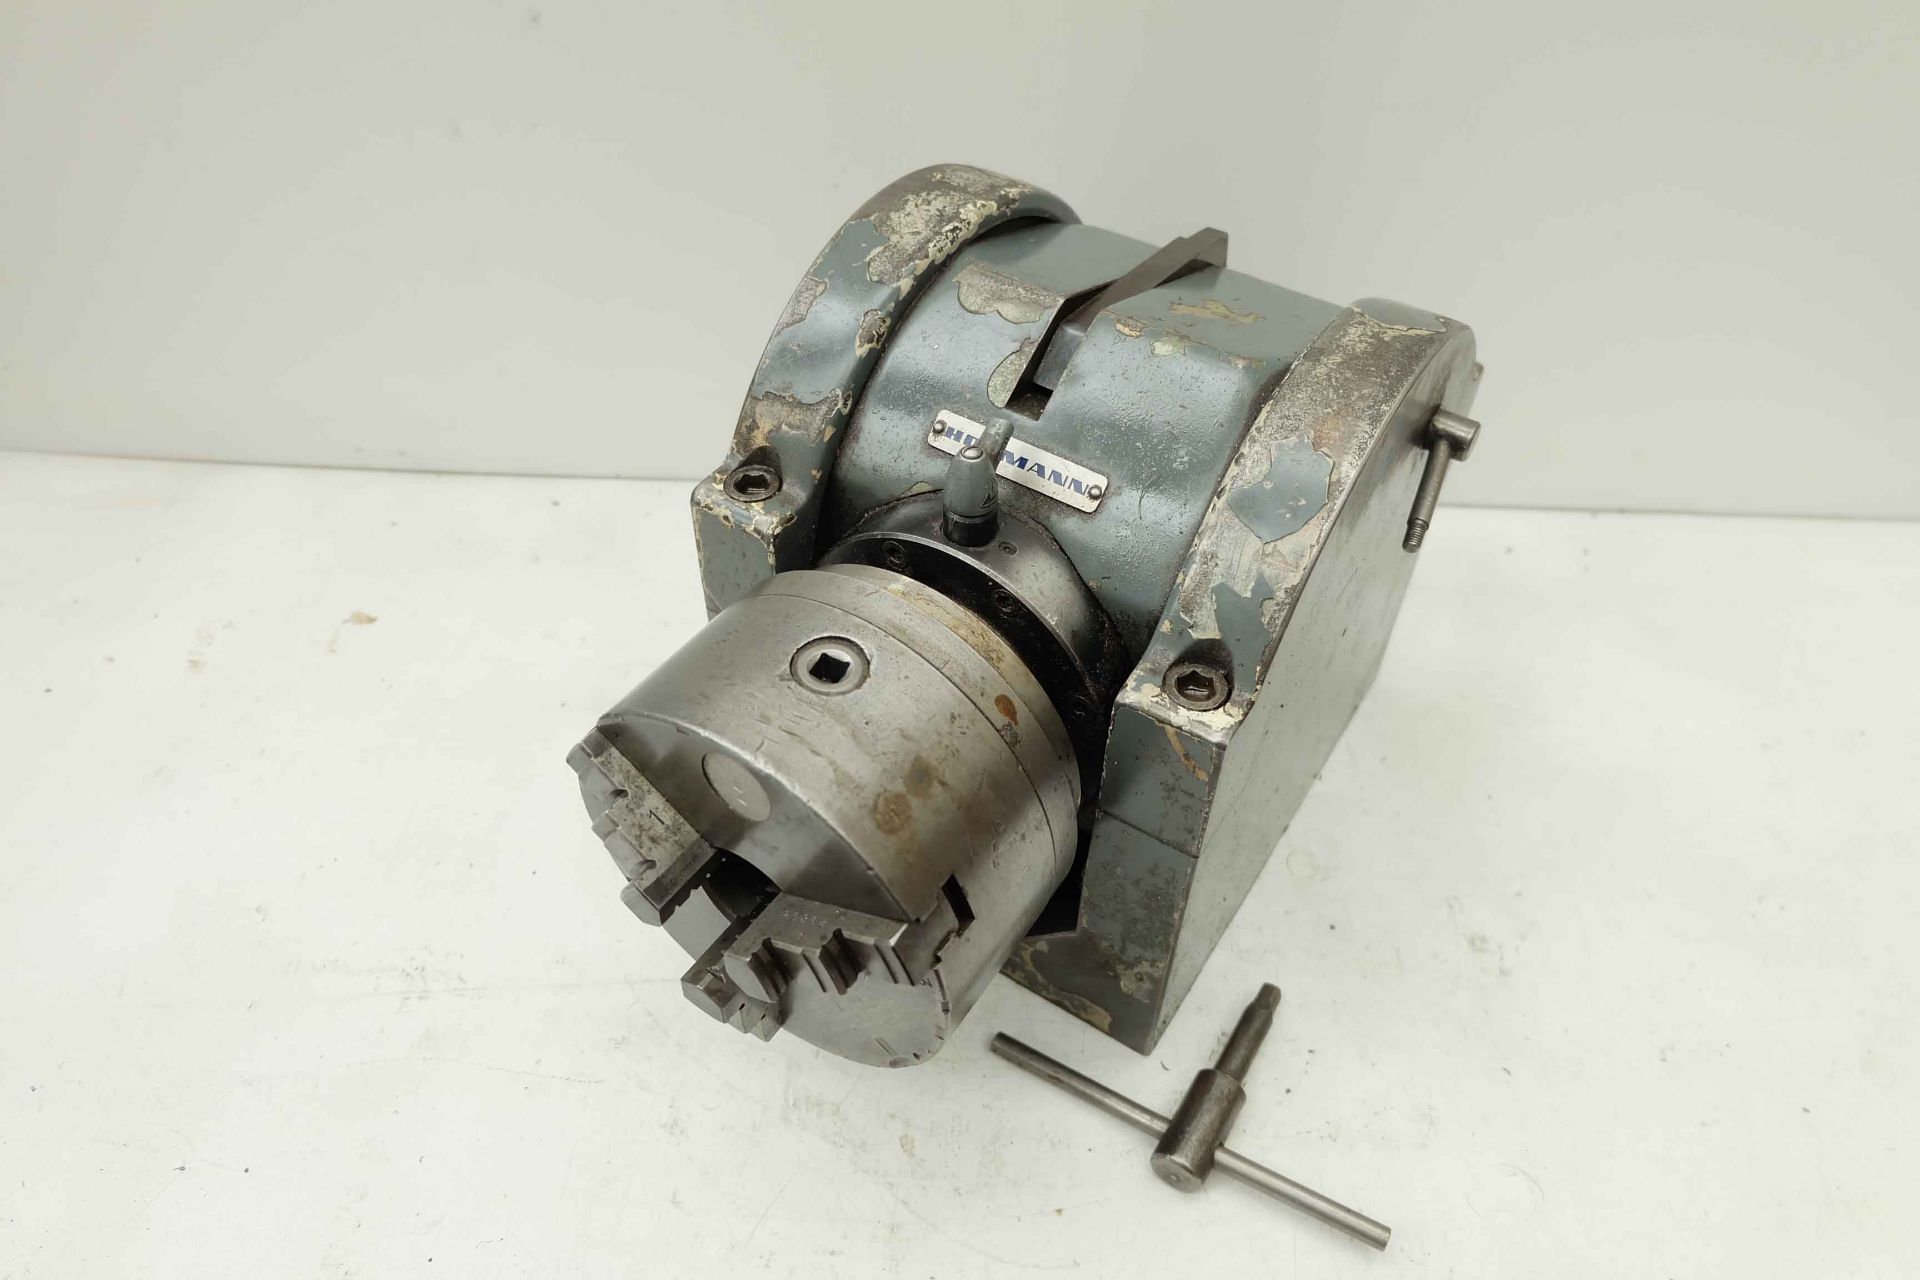 Hofmann Indexing Head. 24 Divisional Indexing. 90 Degrees Tilting. Centre Height 125mm. With 130mm 3